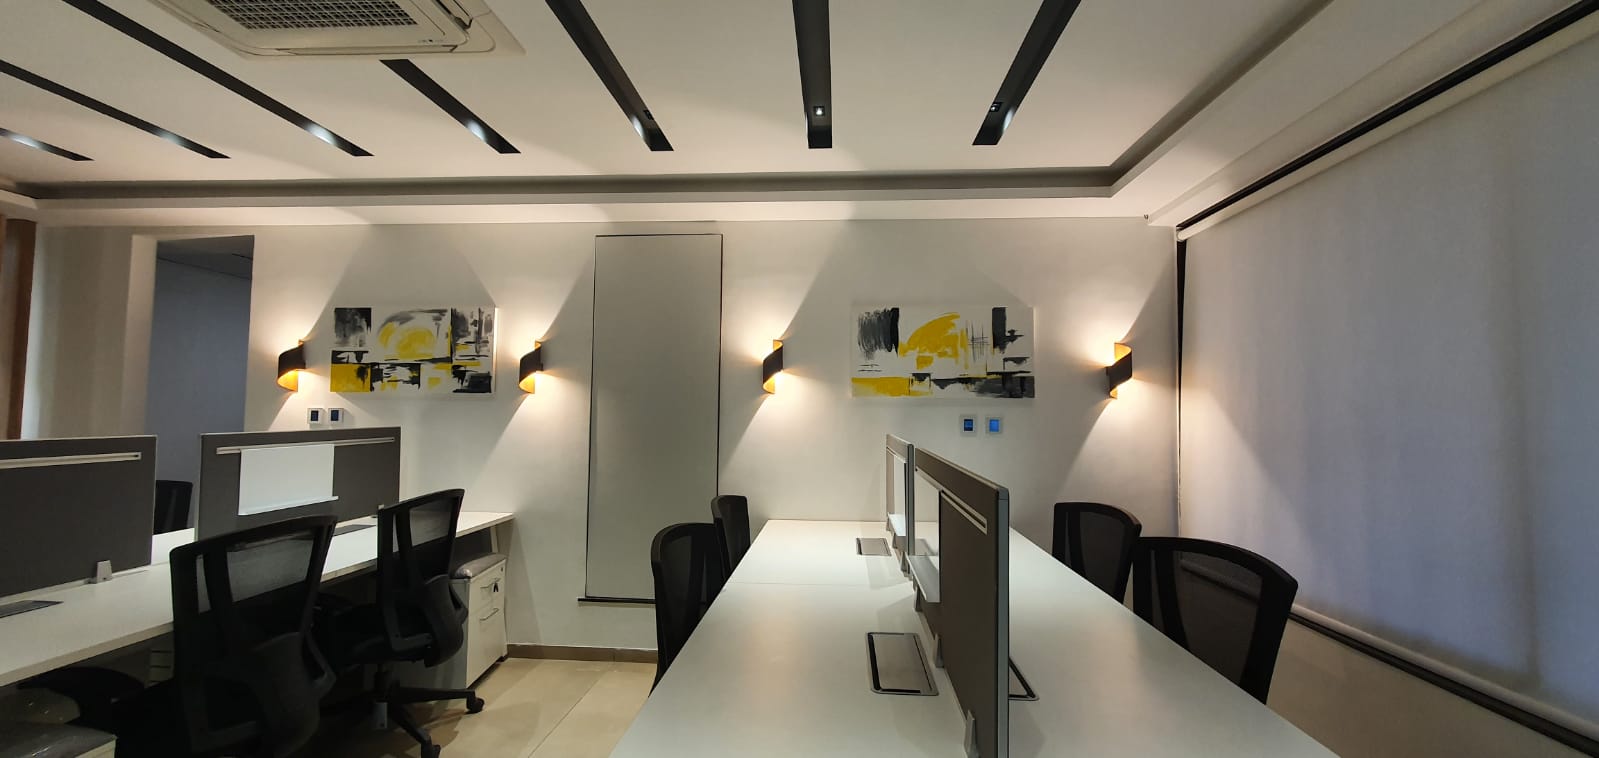 Preleased Office Space for Sale in Rajkot with Current Rental Income Rs. 44000/-.